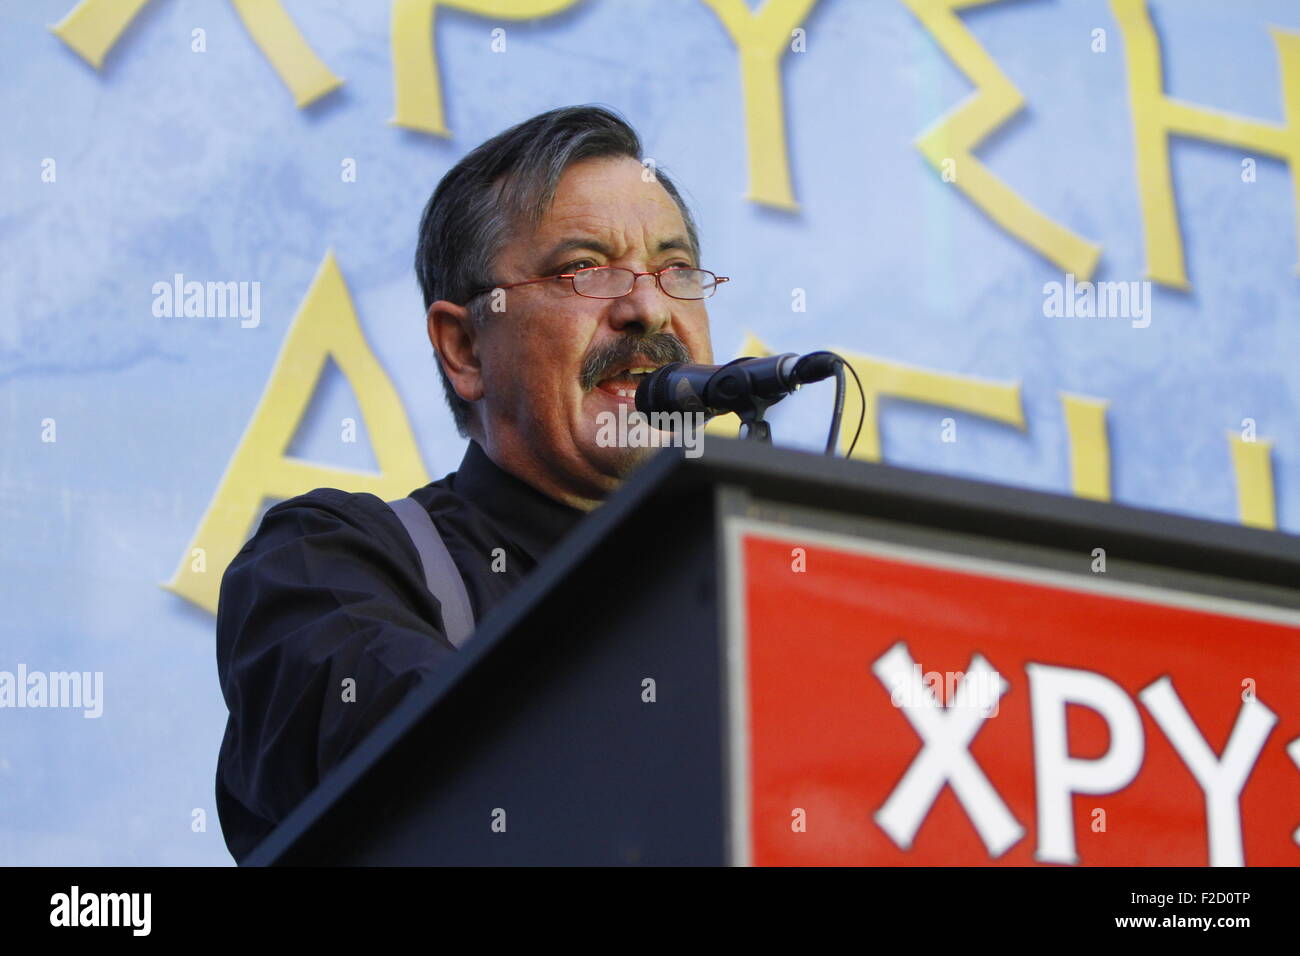 Athens, Greece. 16th September 2015. Golden Dawn MP (Member of Parliament) Christos Pappas addresses the election rally. Greek right wing  party Golden Dawn held an election rally in Athens, four days ahead of election day. The party hopes to gain enough seats in the election to become the third latest party in the Greek Parliament. Credit:  Michael Debets/Alamy Live News Stock Photo